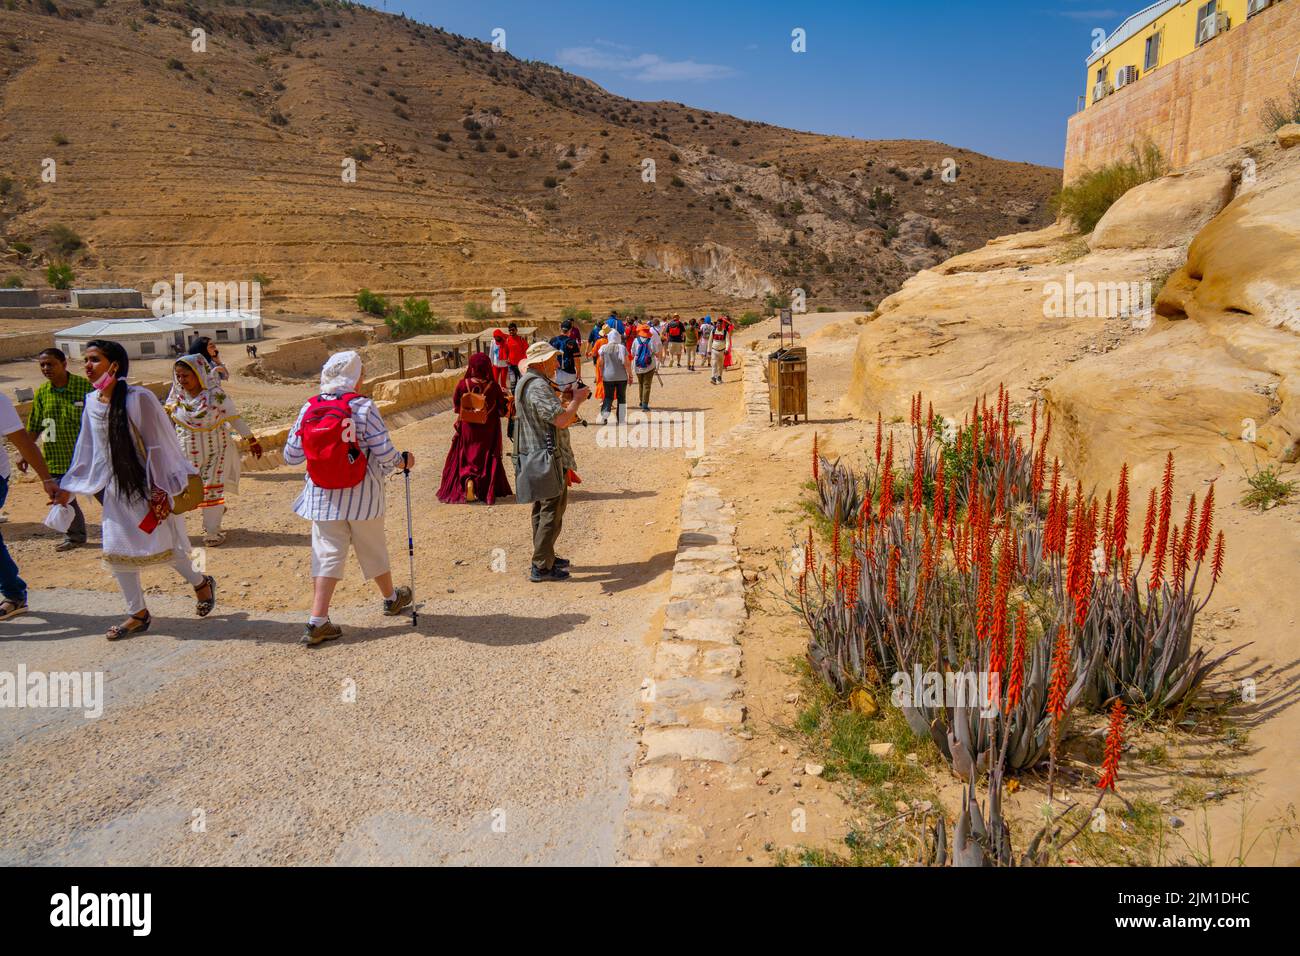 Crowds of people walking down the entrance road to Al-Siq and Petra in Wadi Musa Jordan with wild aloe  vera plants in foreground Stock Photo